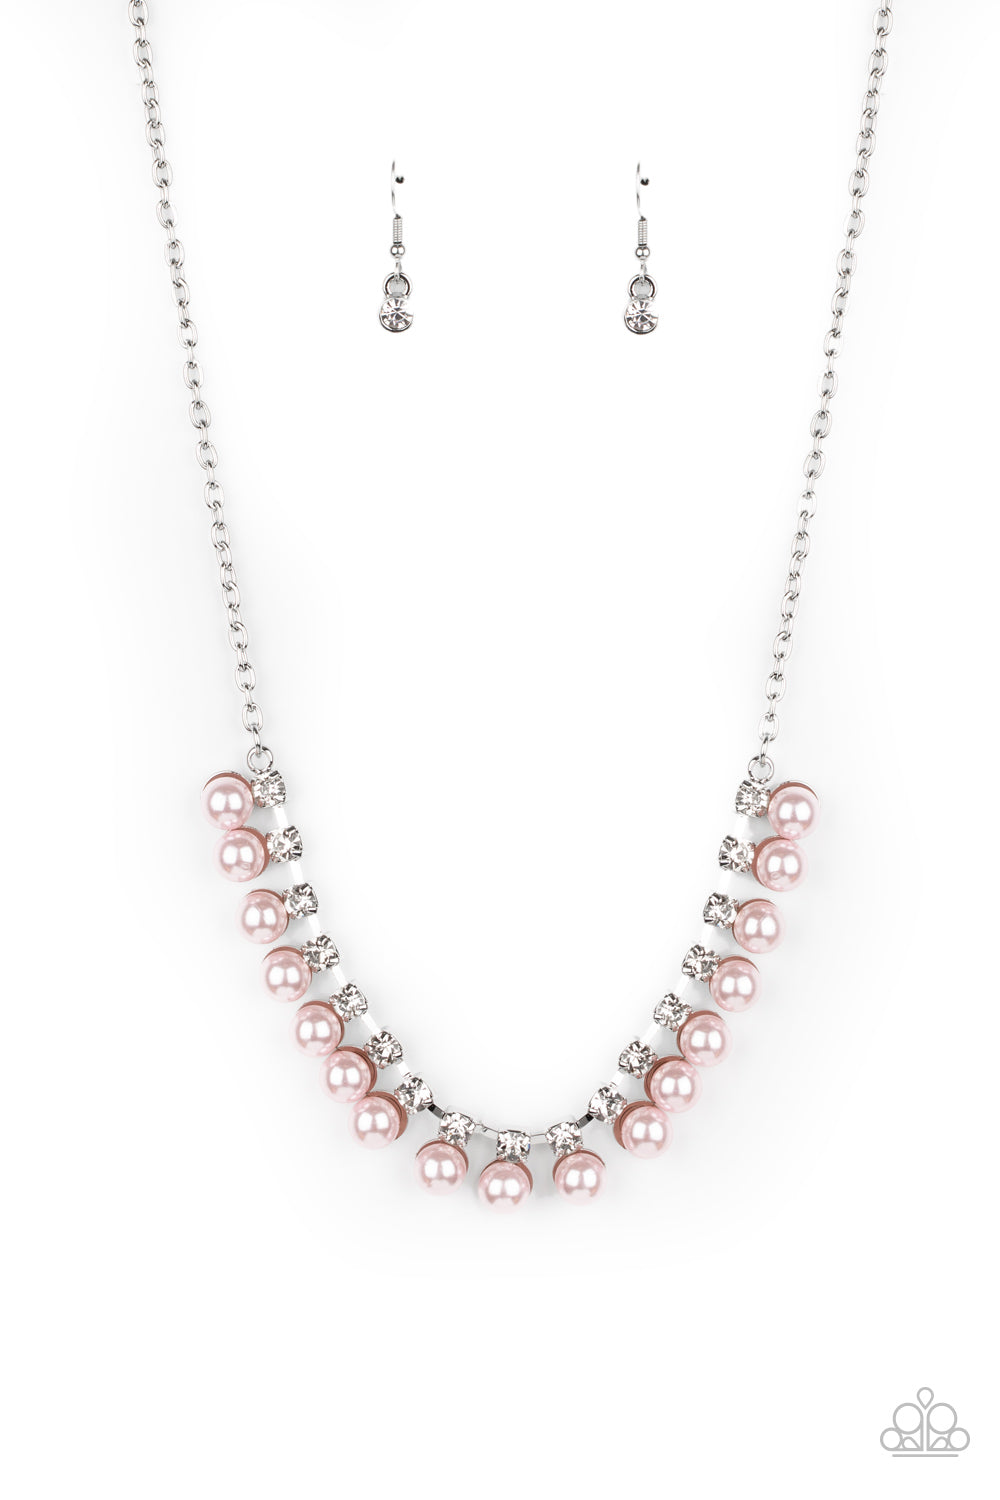 Frozen in TIMELESS Necklace (Black, Pink)